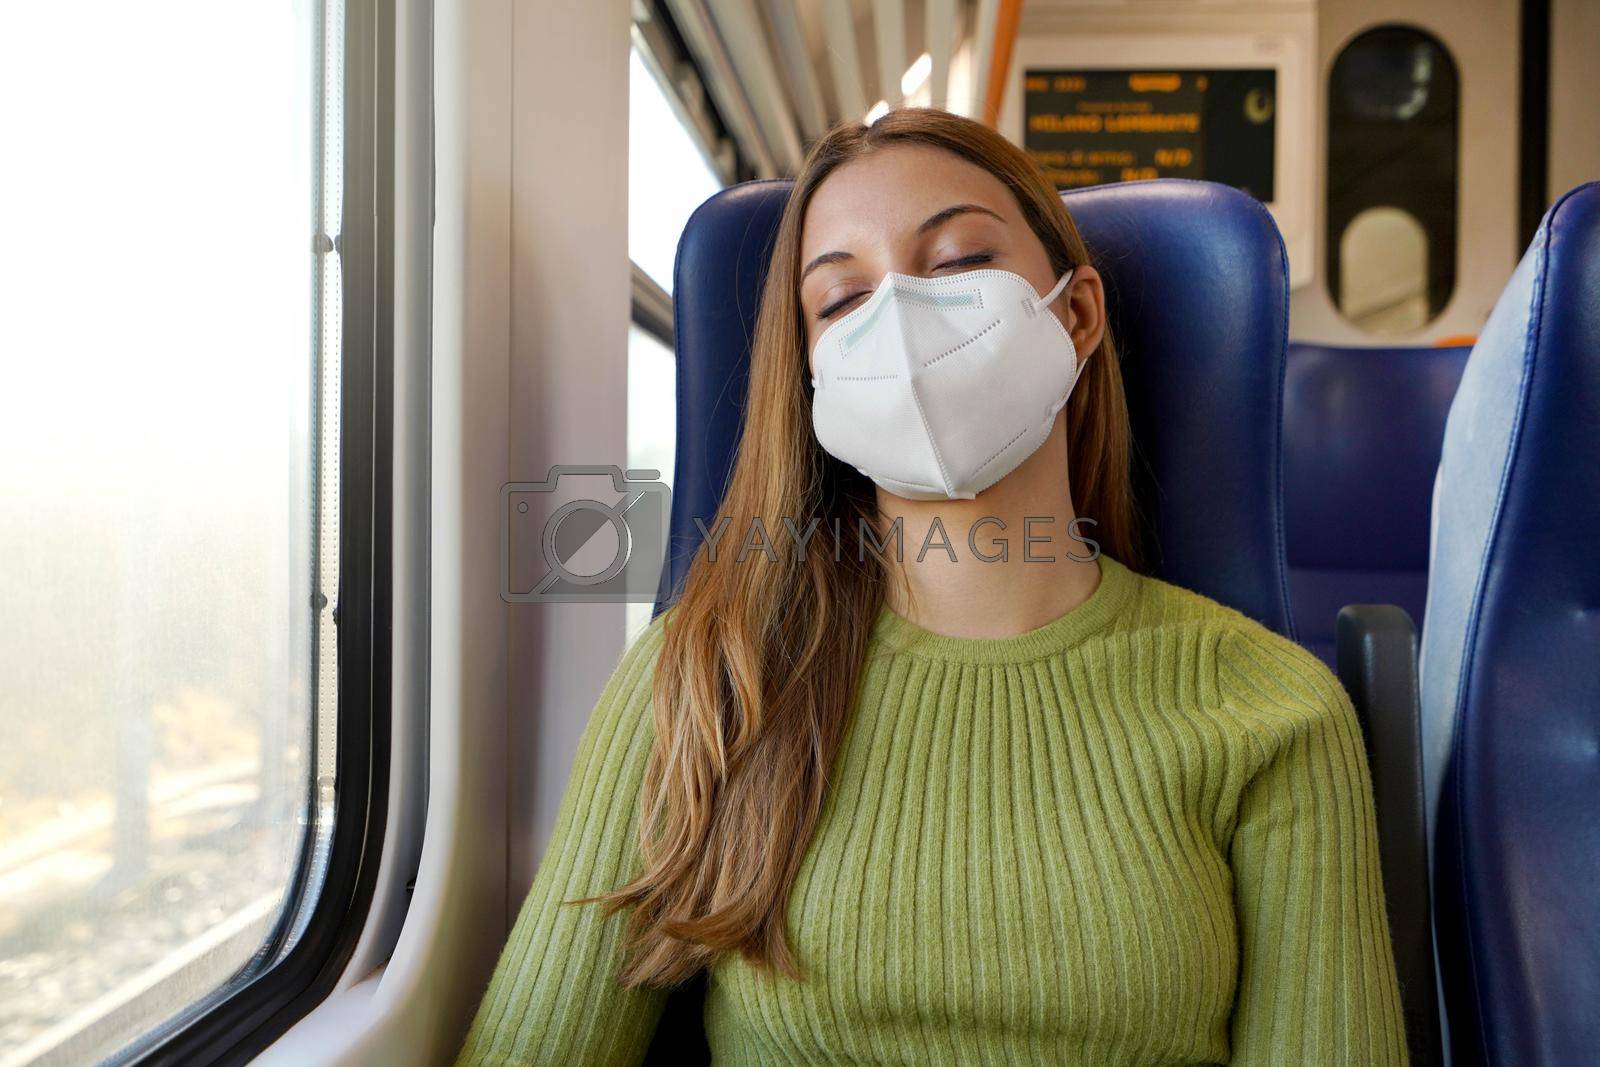 You can sleep peacefully. Relaxed beautiful woman with medical face mask sleeping sitting in the train. Train passenger traveling safely sitting in a seat and sleeping.